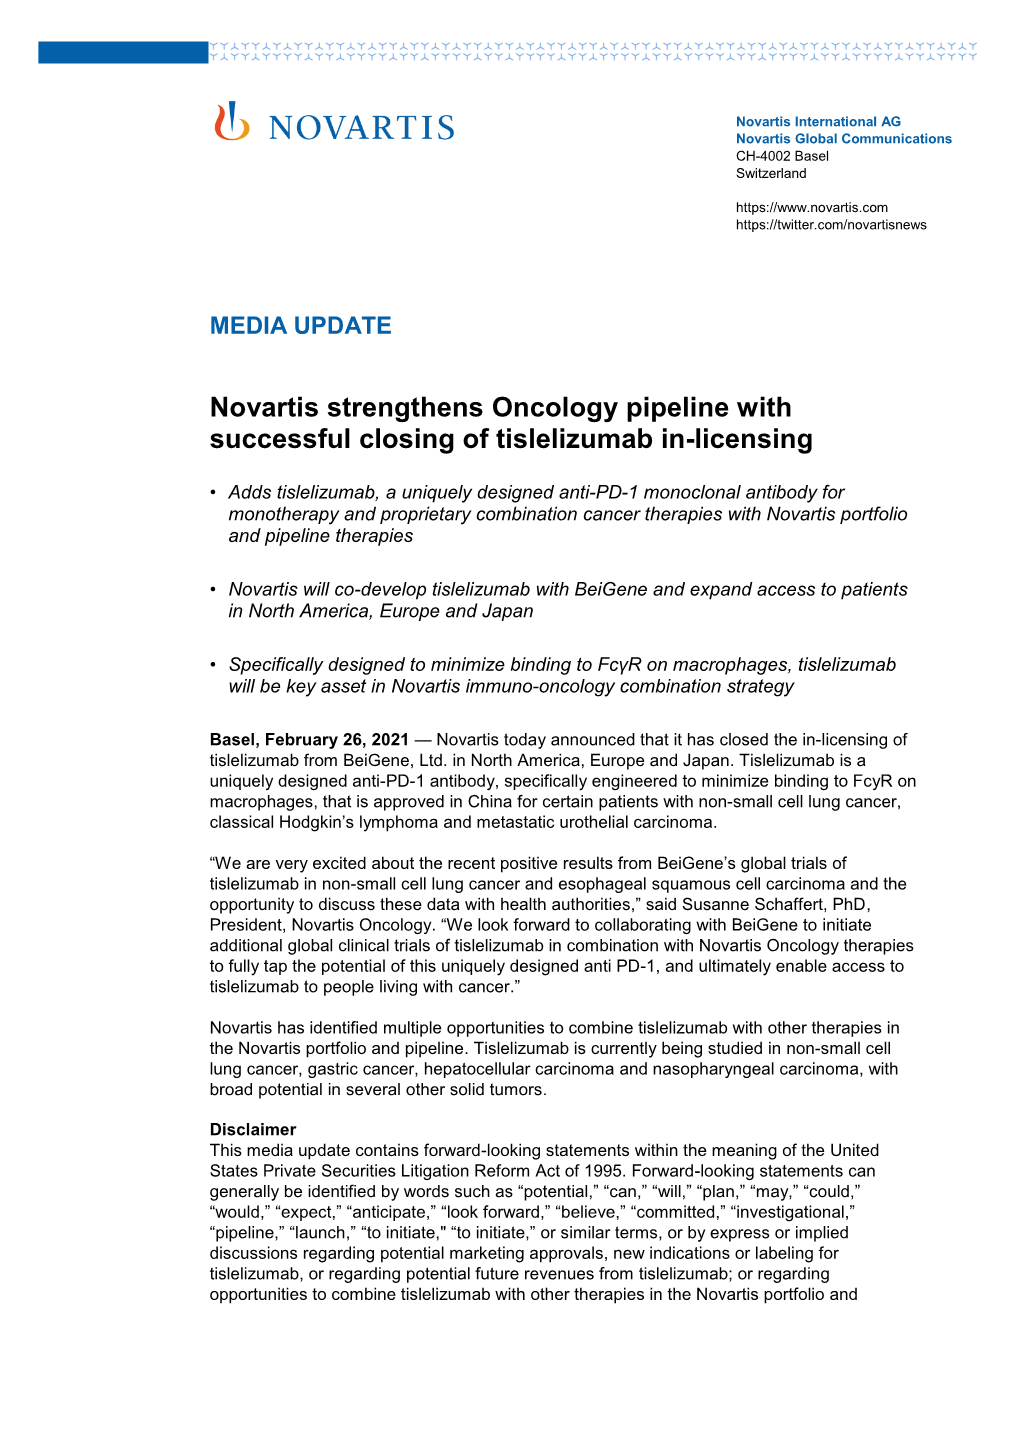 Novartis Strengthens Oncology Pipeline with Successful Closing of Tislelizumab In-Licensing